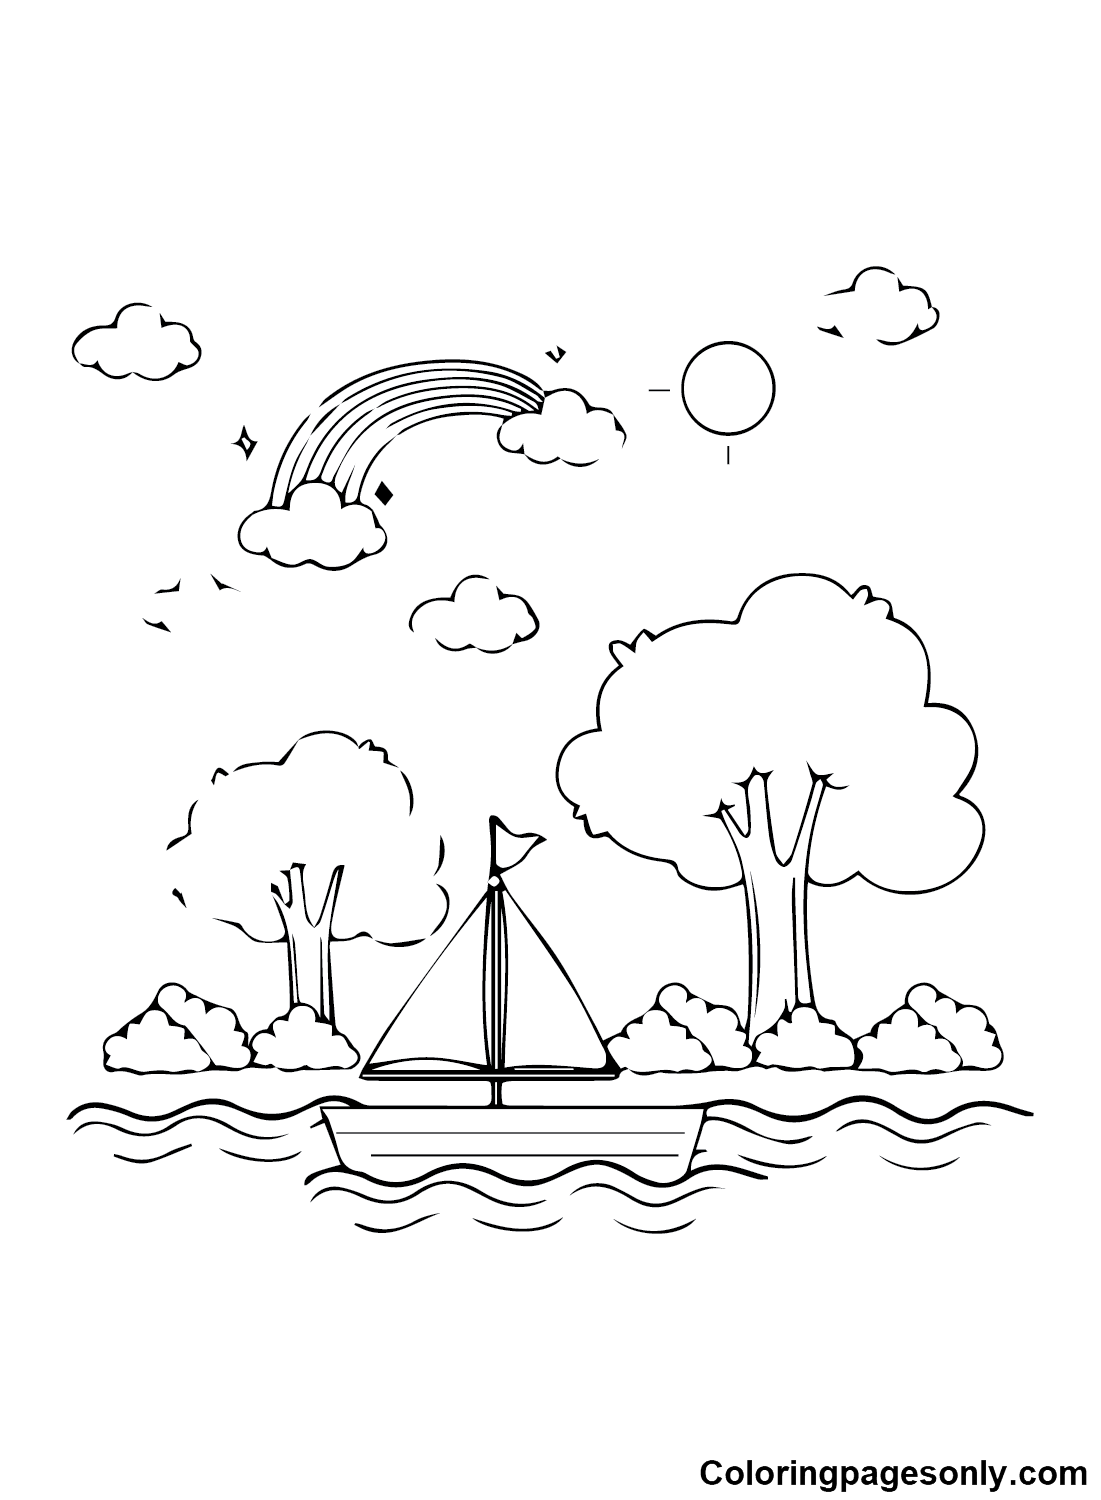 Ship to Print Coloring Page